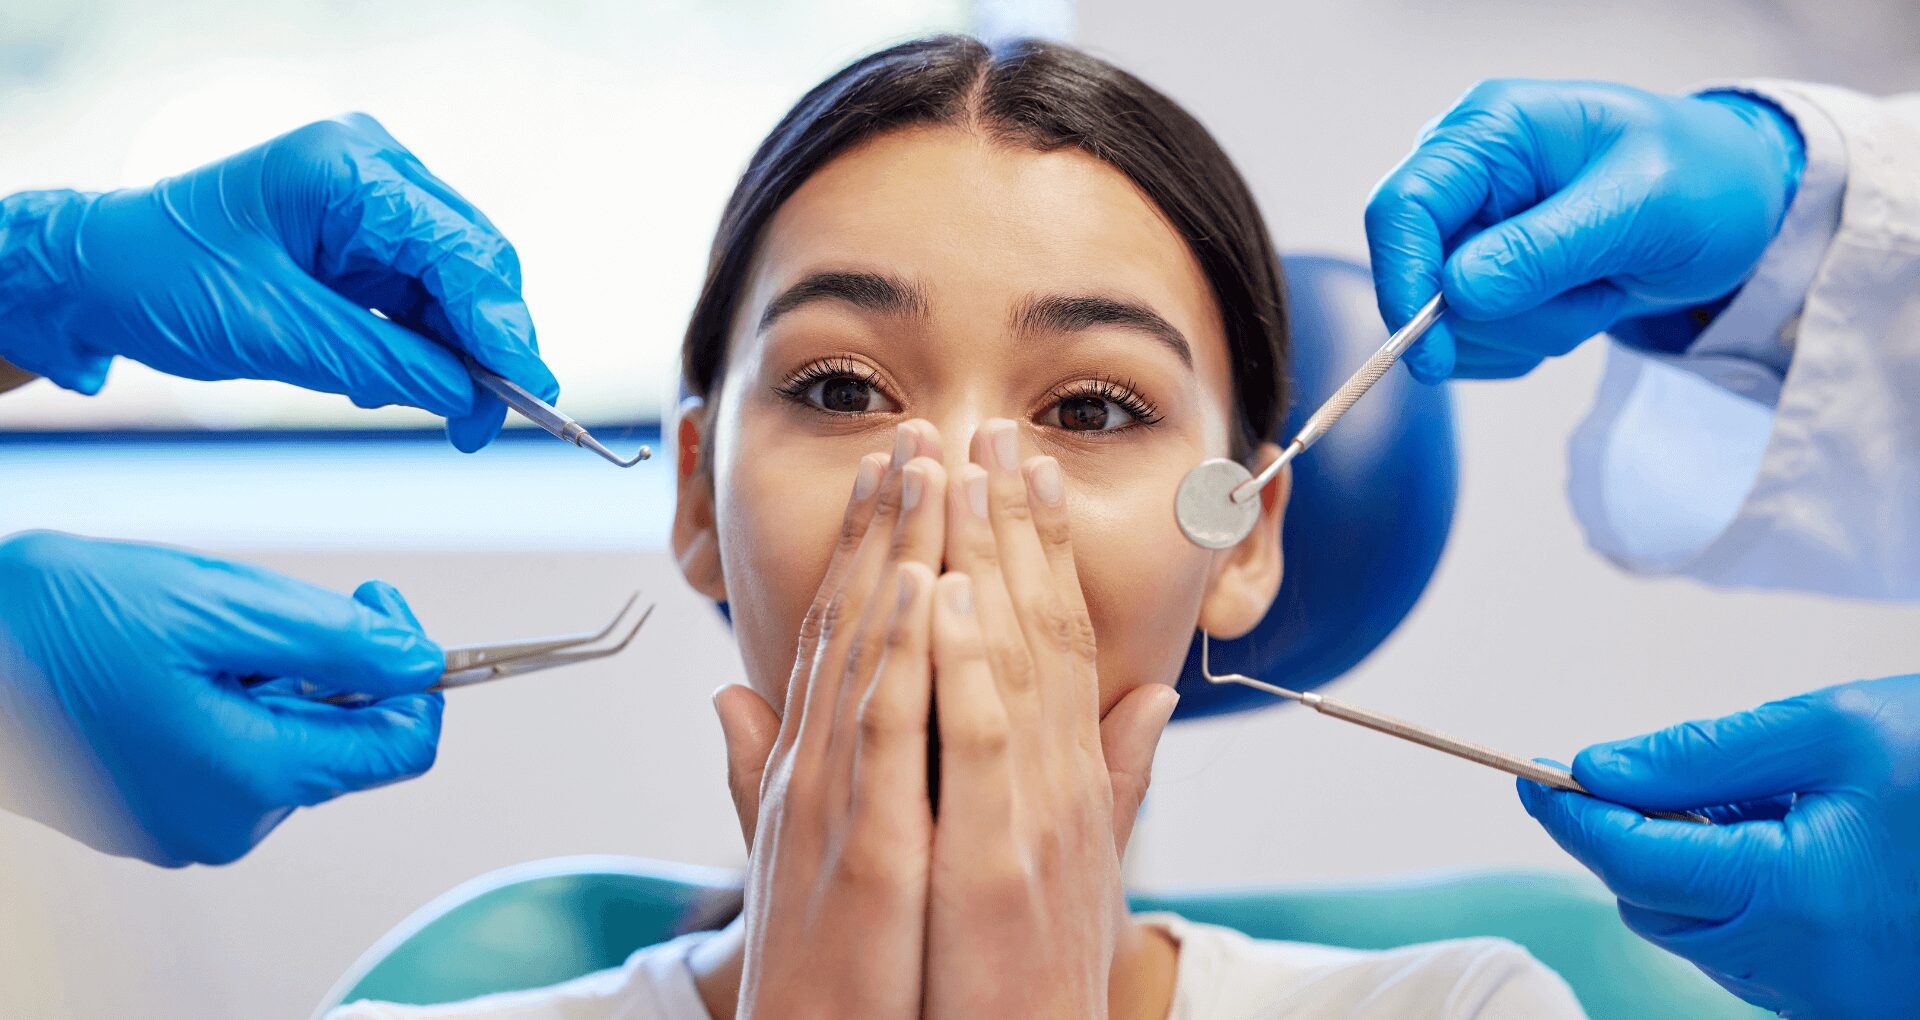 young woman in dental chair with dental anxiety